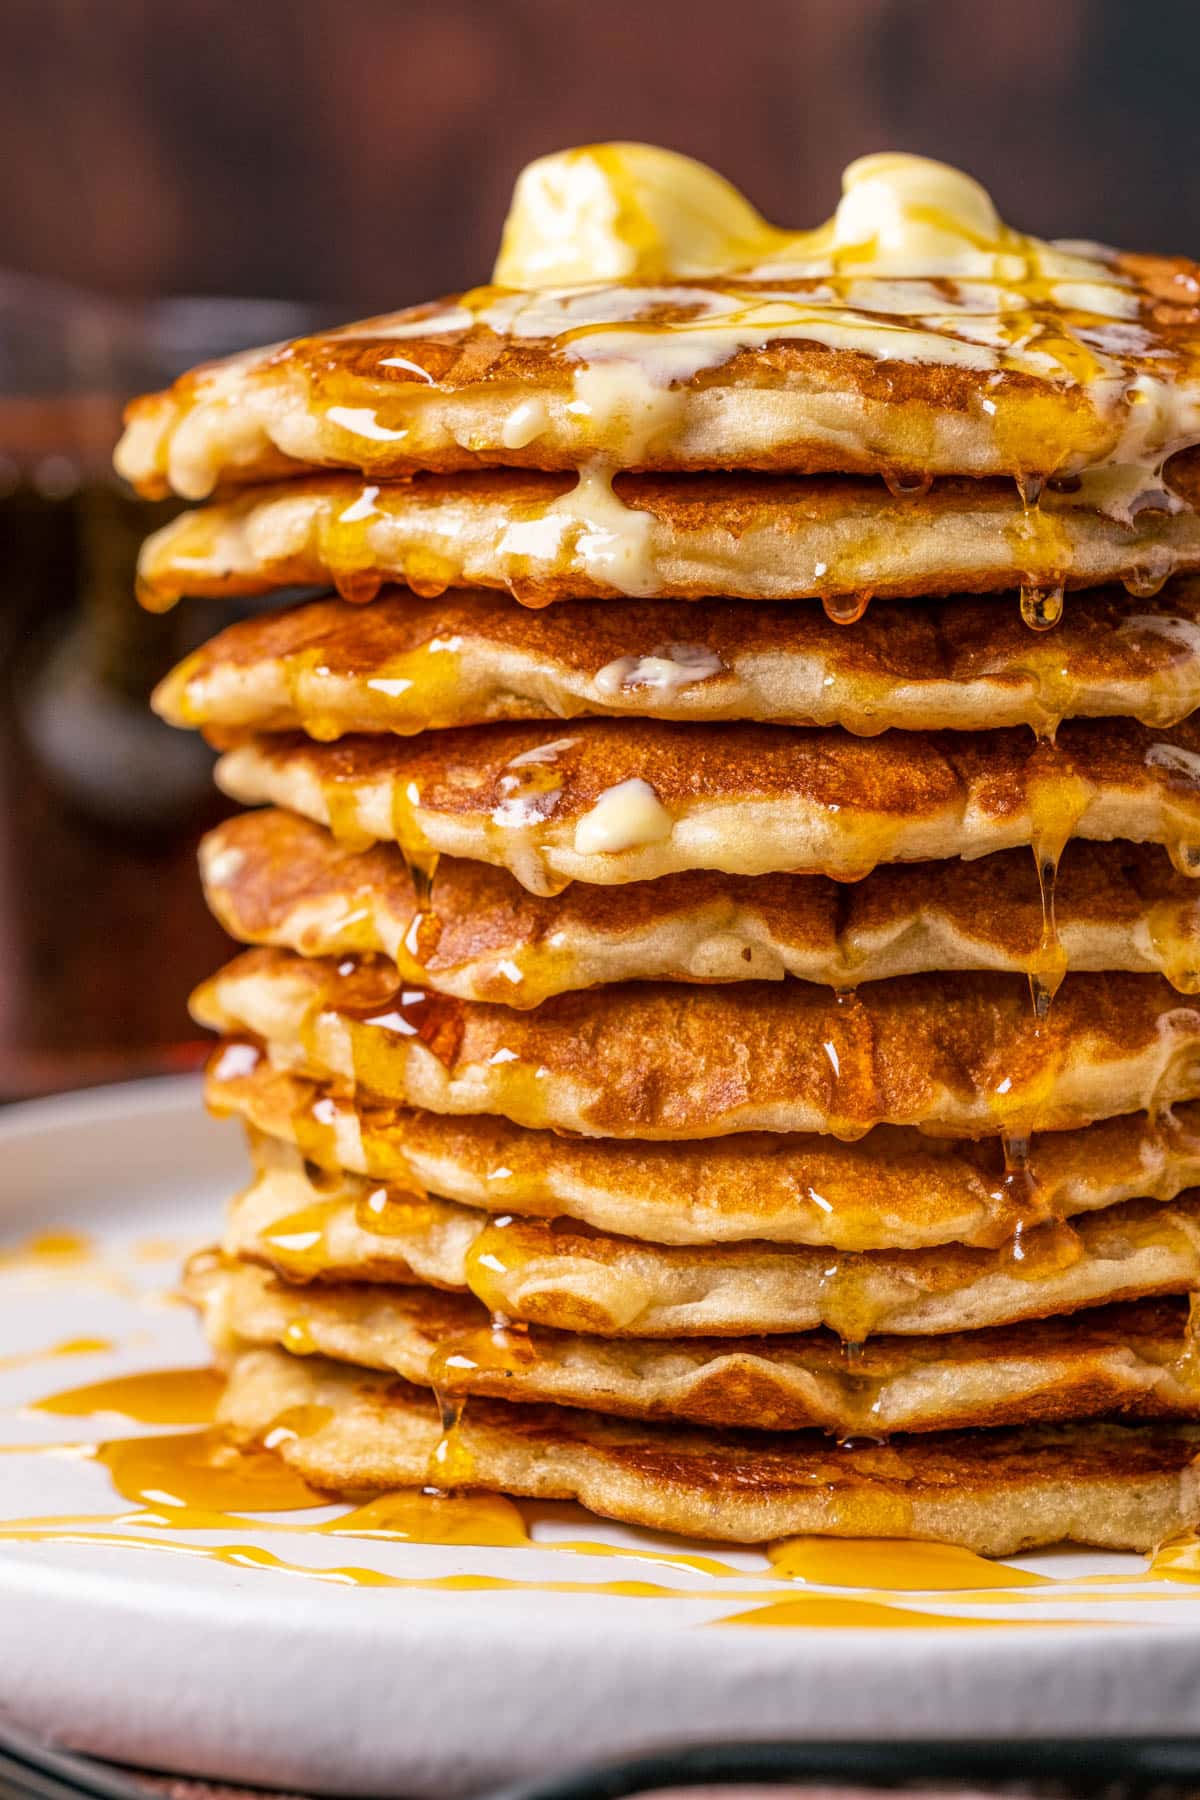 Stack of vegan oatmeal pancakes topped with vegan butter and syrup on a white plate.